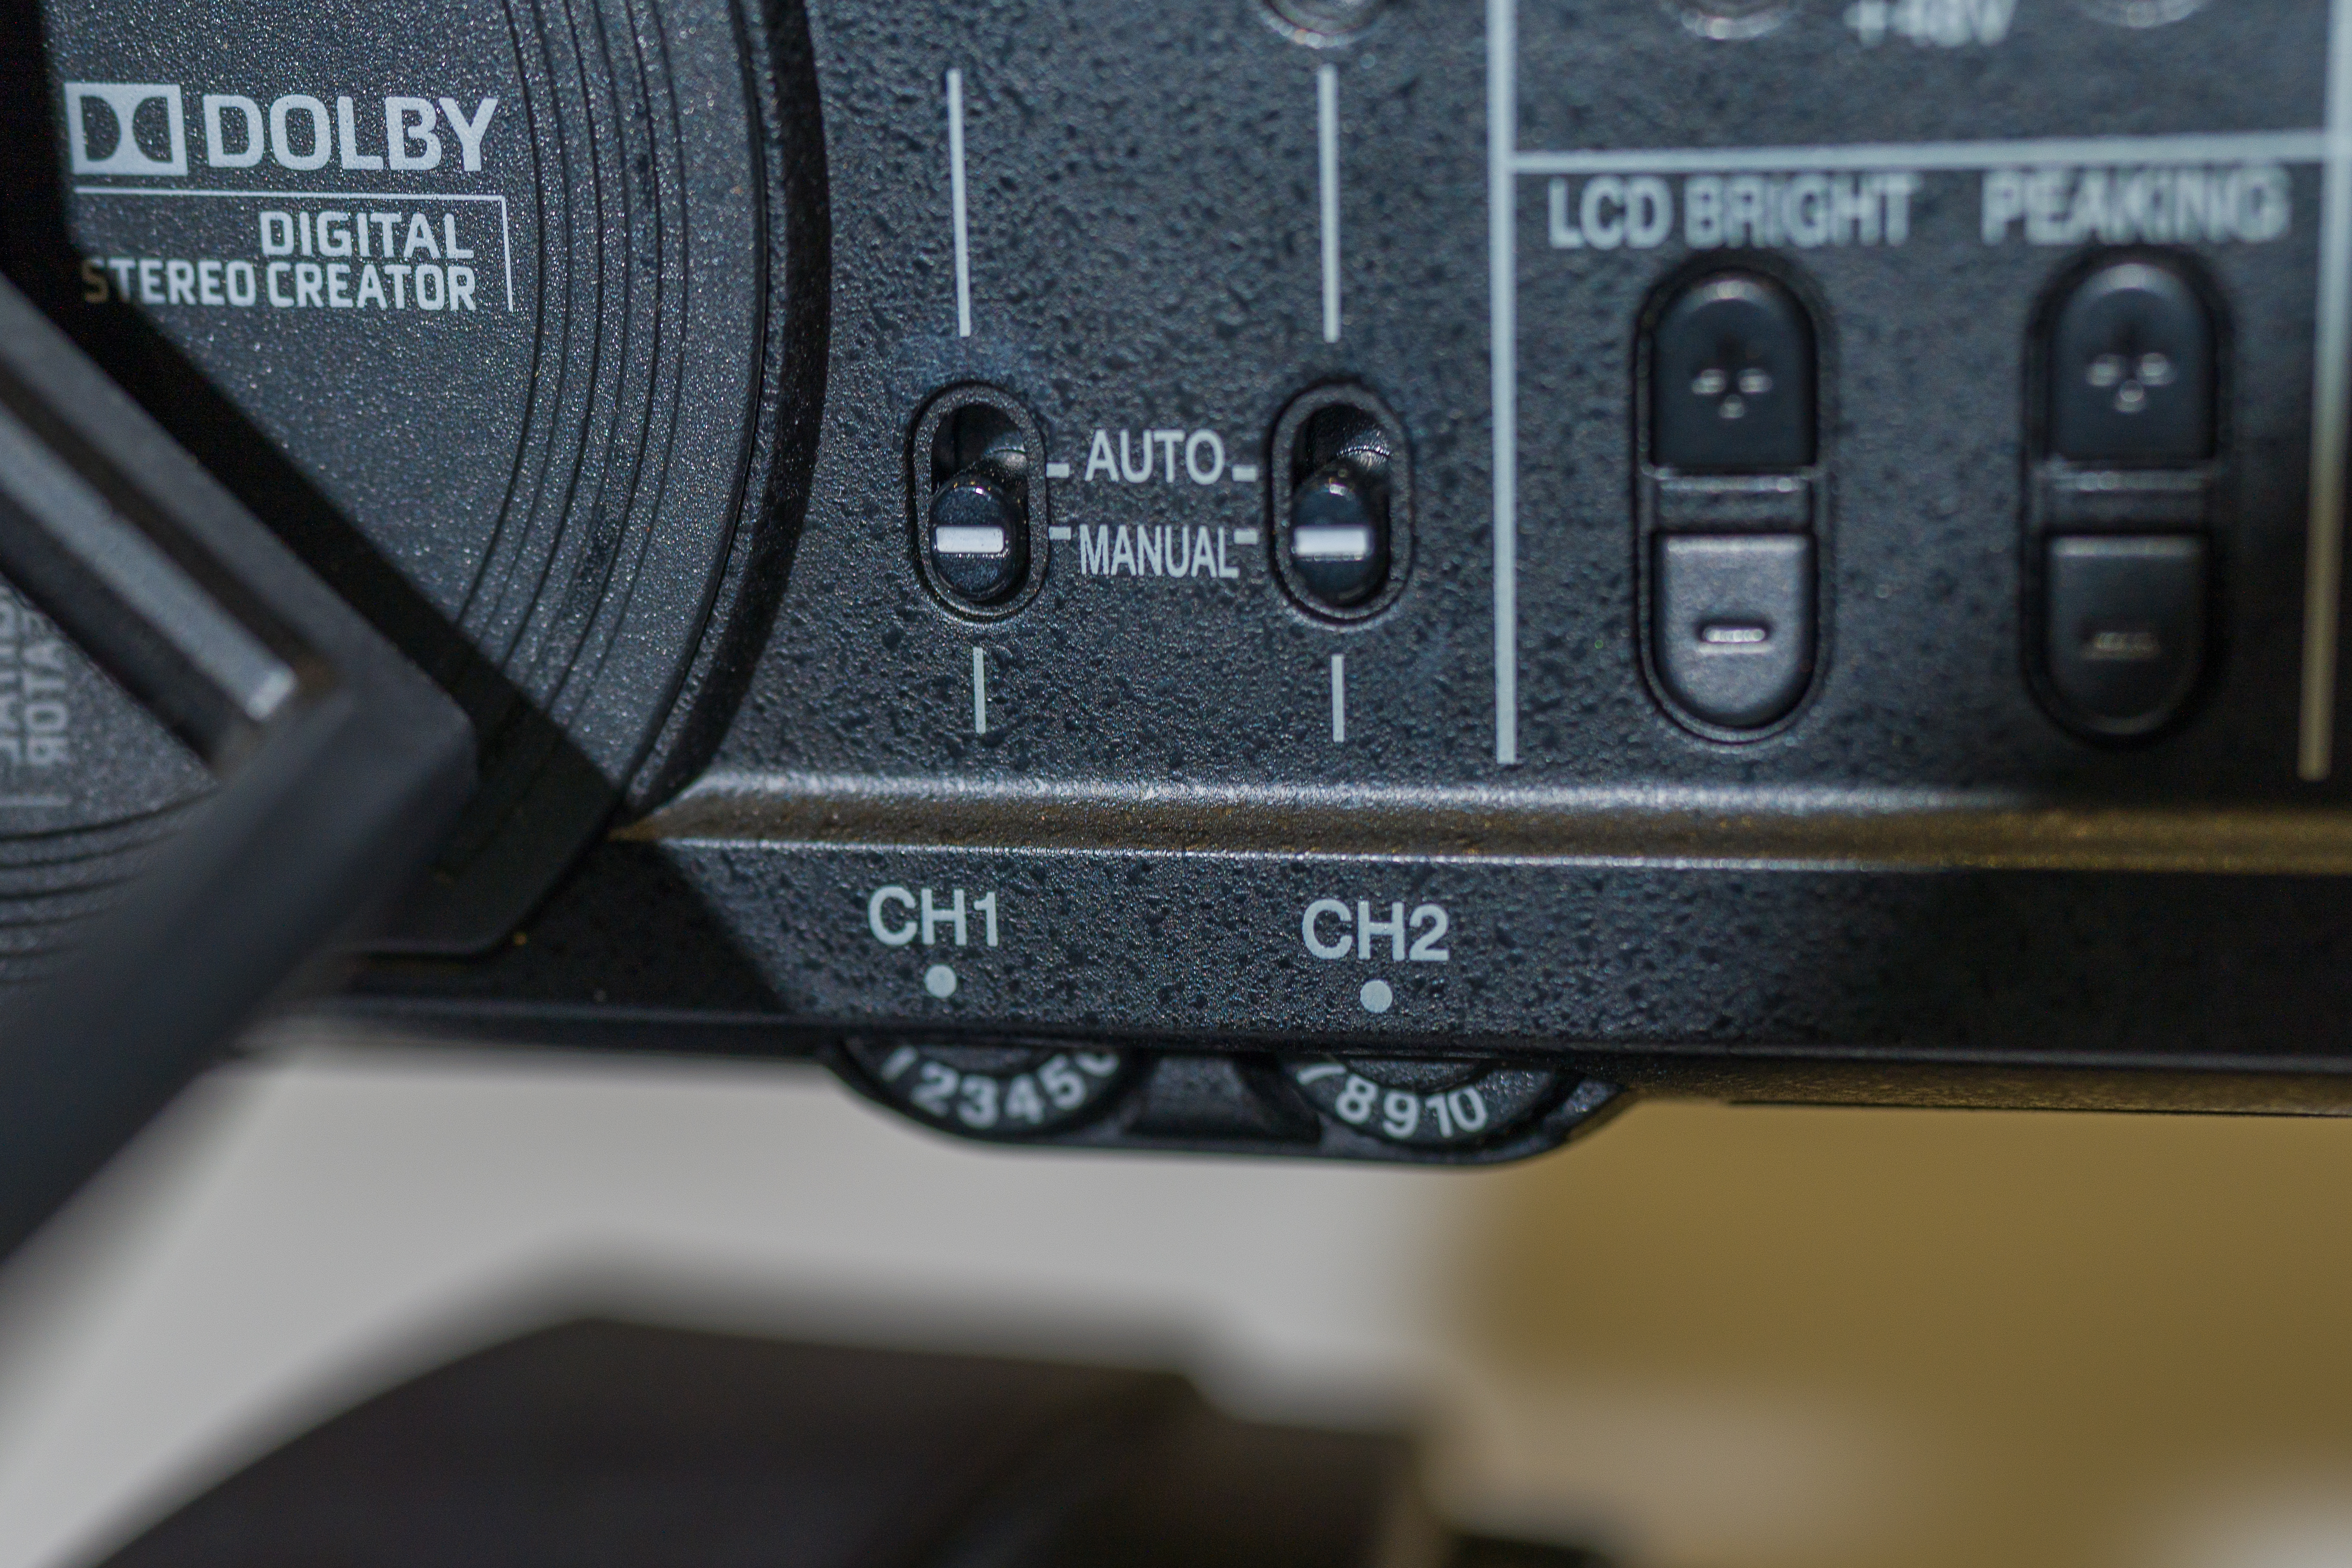 Video camera manual/auto volume switch and two volume dials when manually controlling audio.